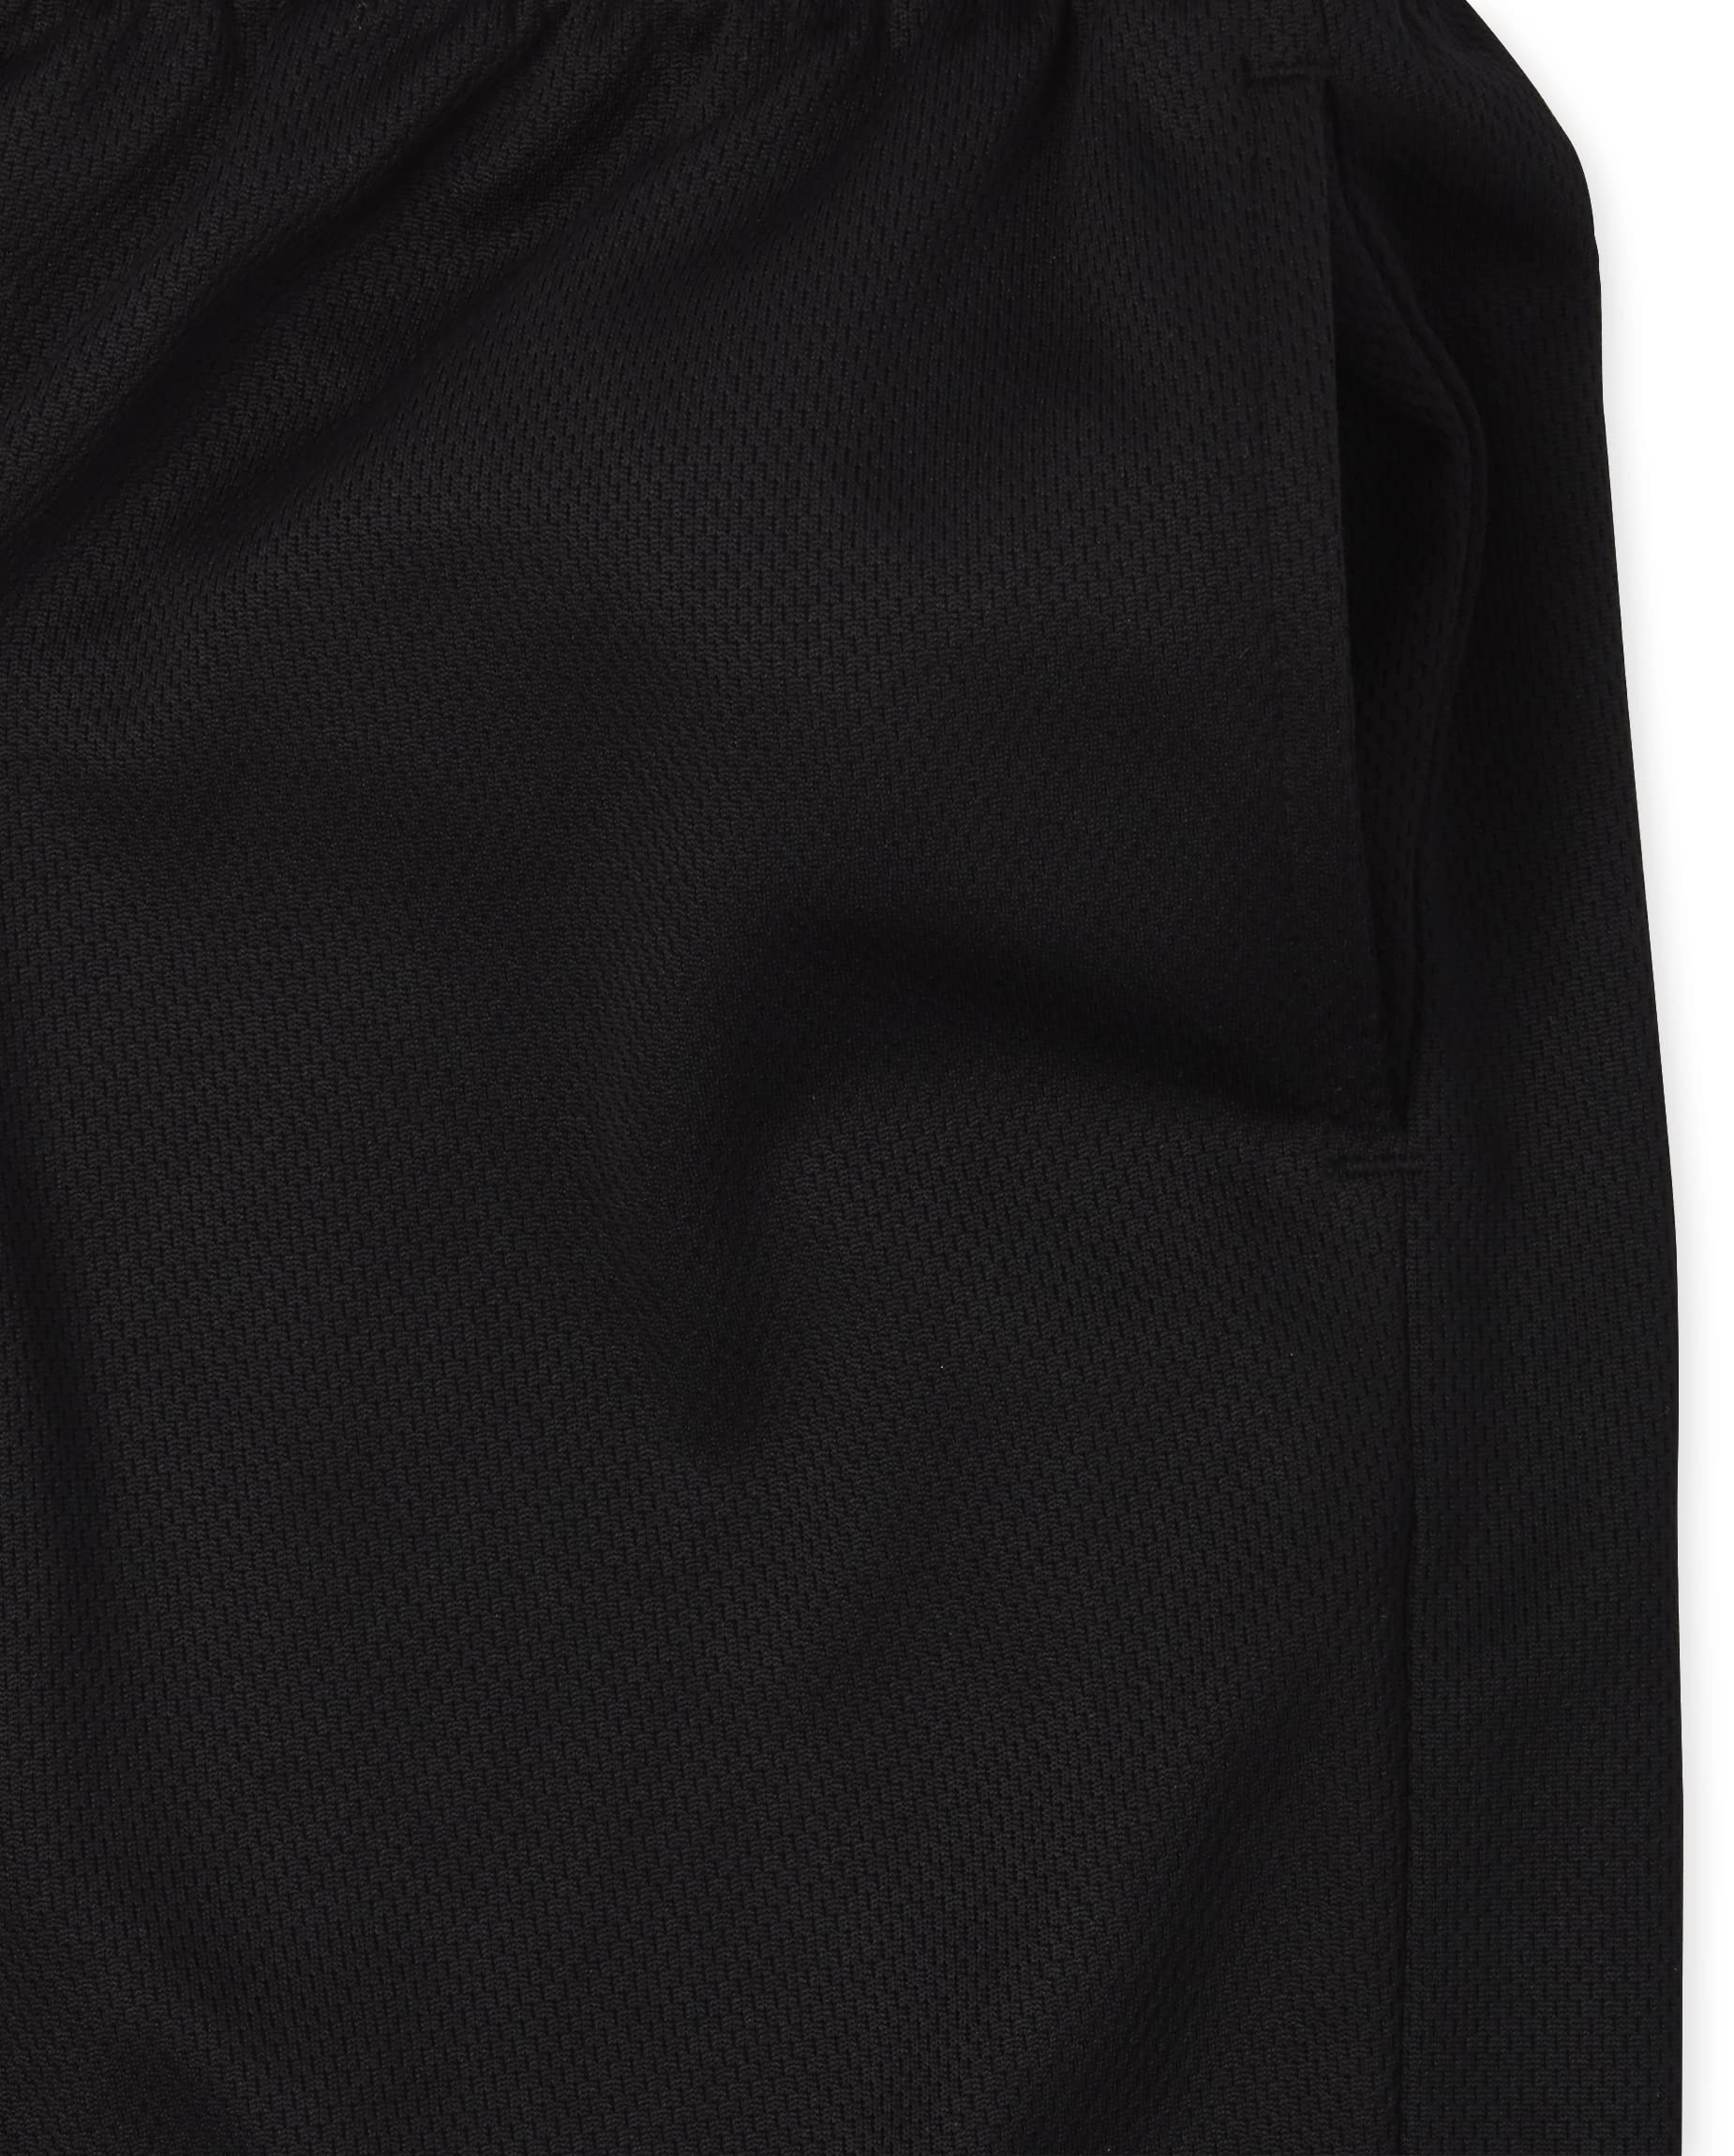 The Children's Place Boys' 2 Pack Mesh Performance Basketball Shorts